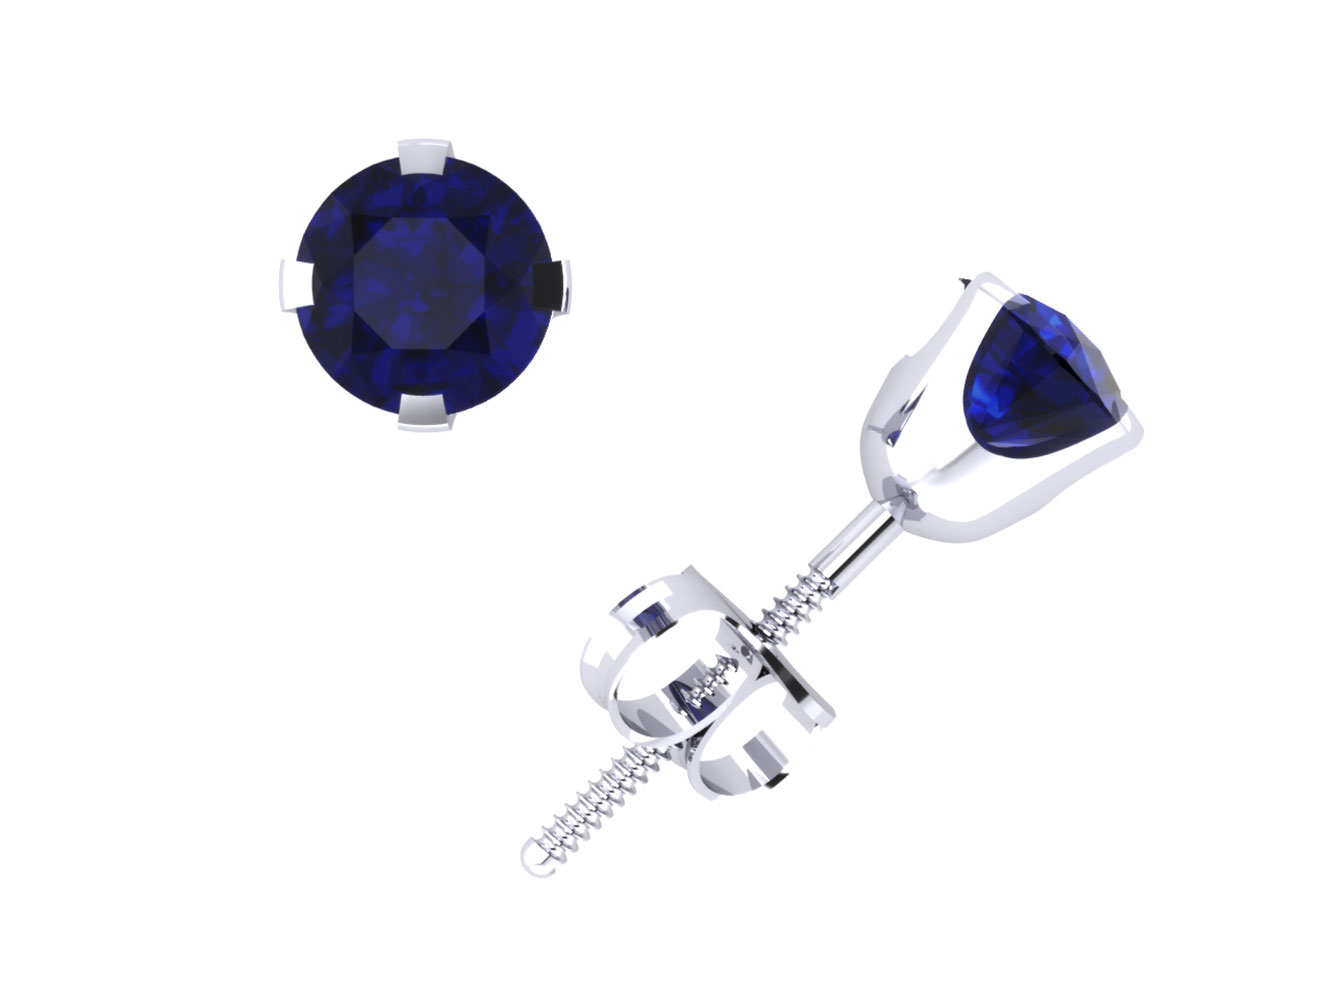 Jewel We Sell 0.40Ct Round Cut Blue Sapphire Stud Earrings 14k White or Yellow Gold 4Prong Setting AAA Quality